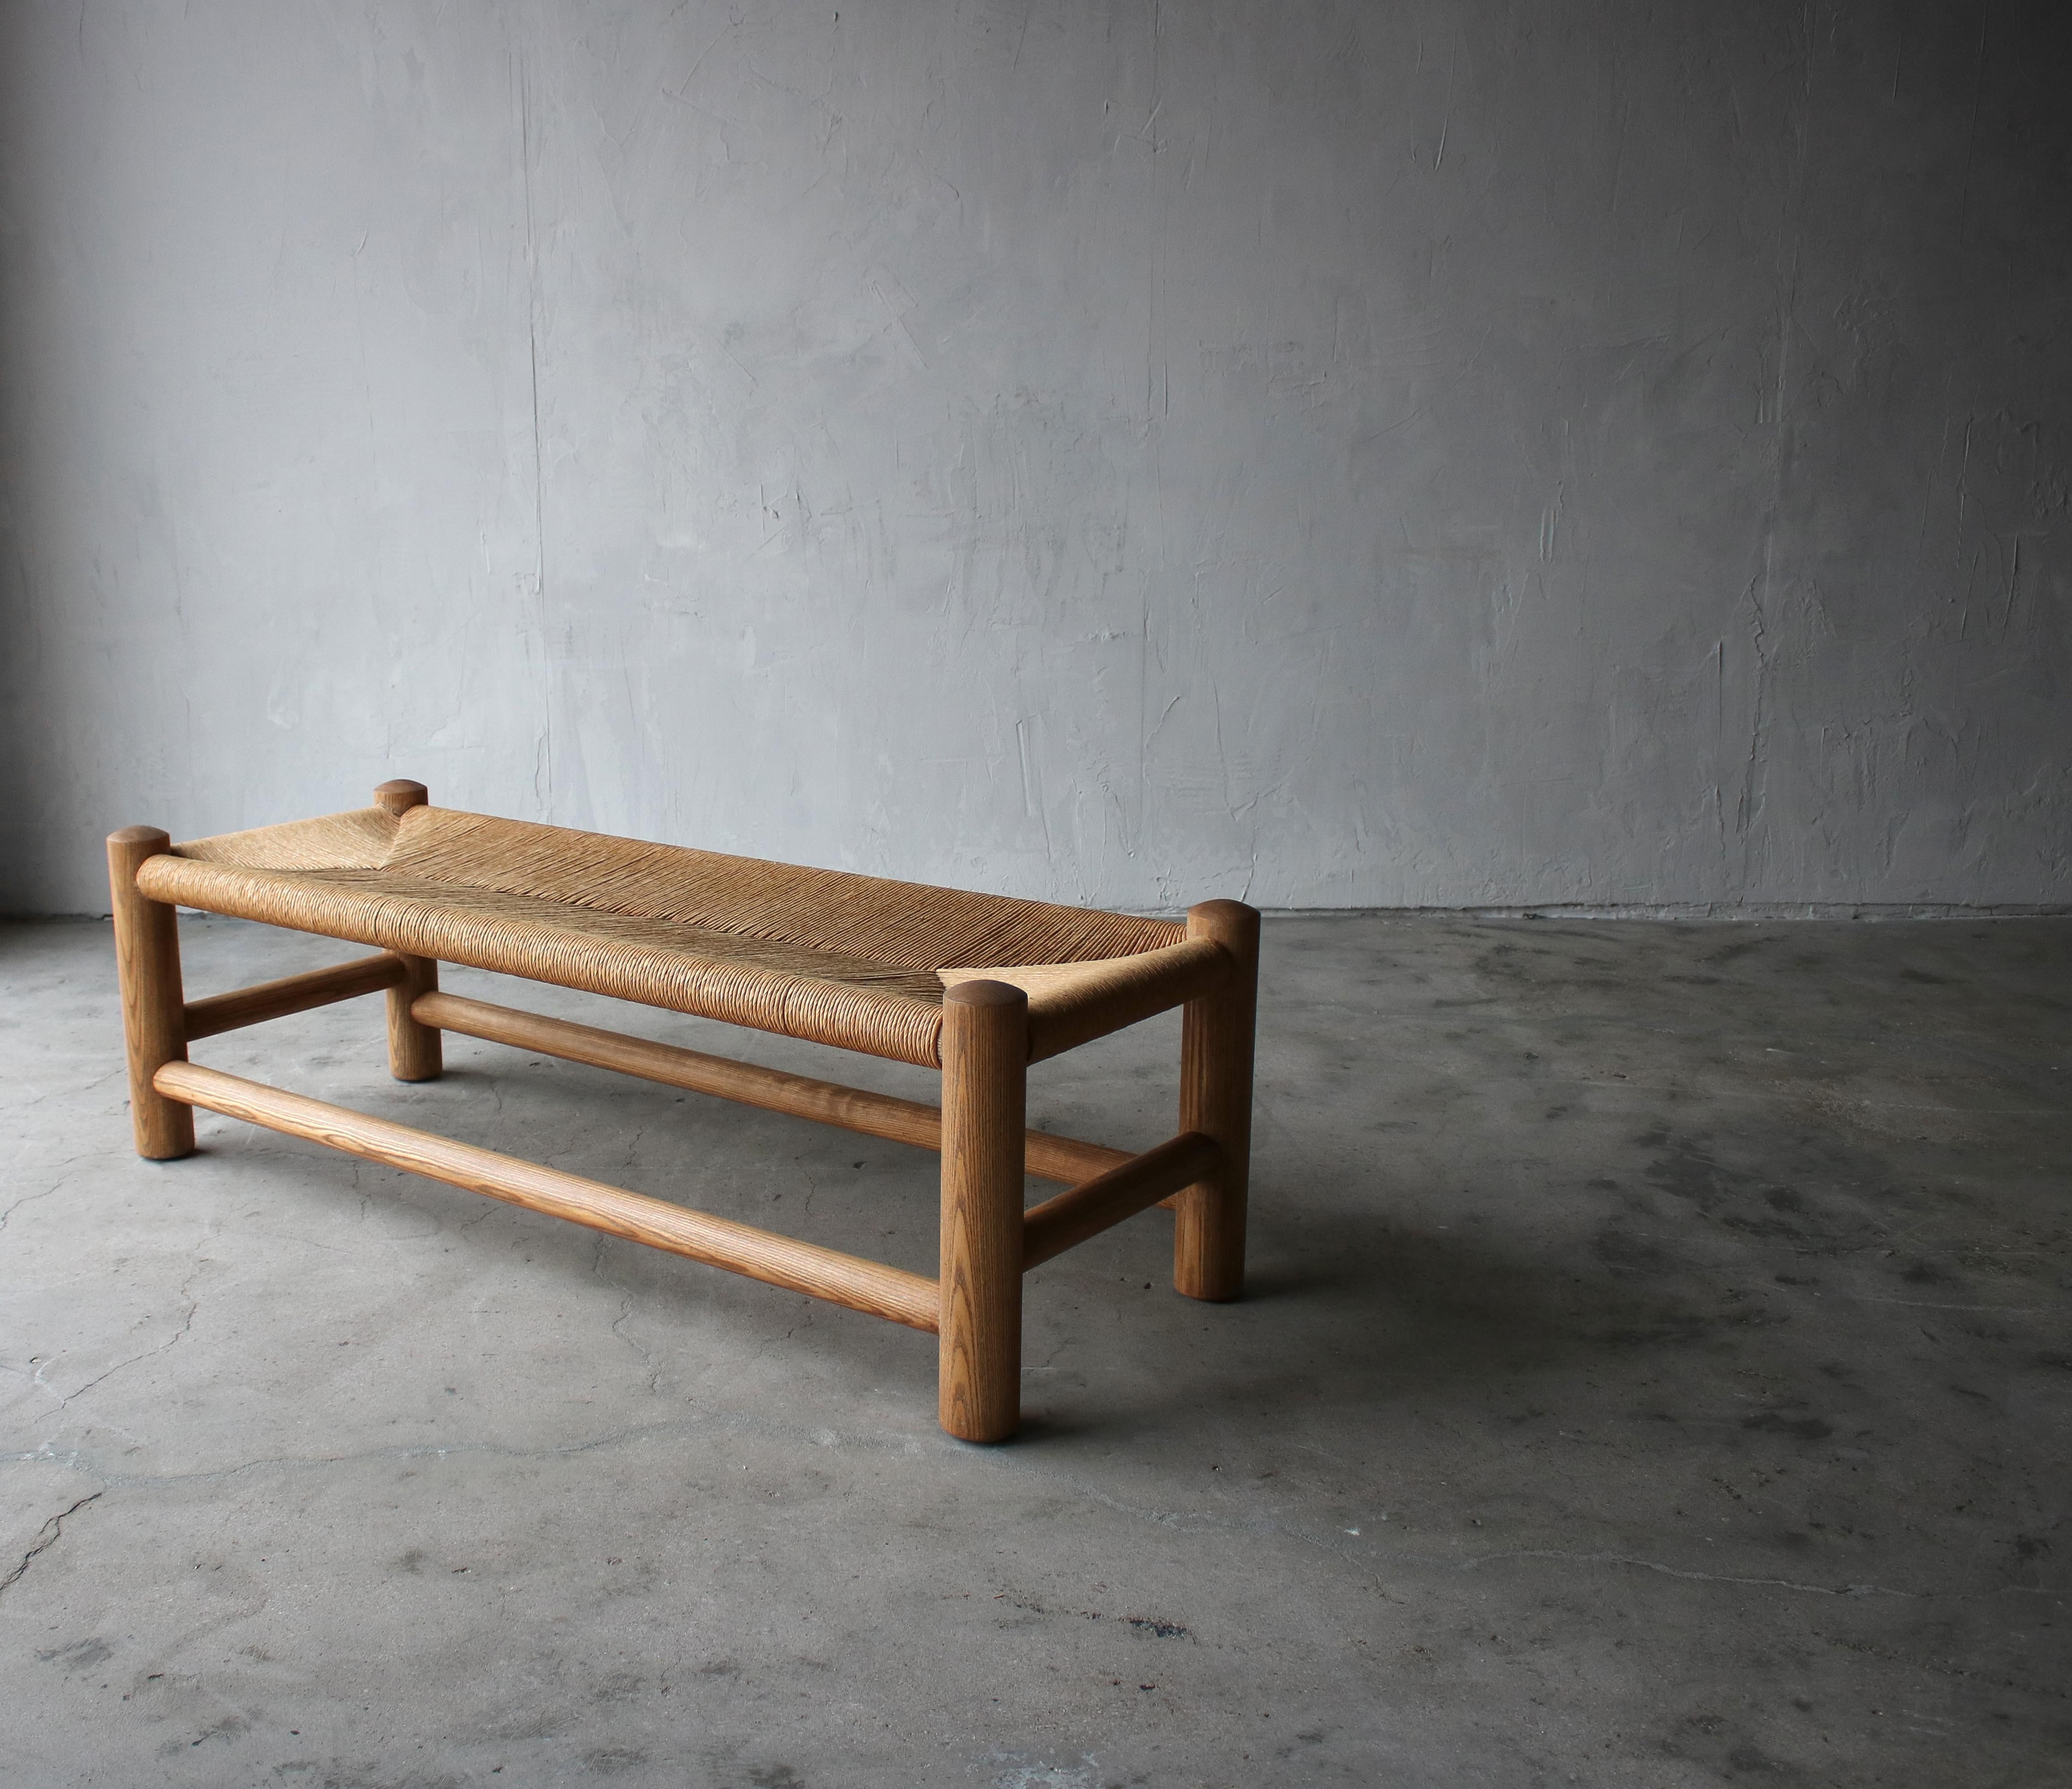 Simple and on trend as can be. This oversized midcentury bench by Wim Den Boon is a gorgeous combination of woven rush and pine. If you're looking for that neutral piece of seating that will add texture and interest to your space, look no further.